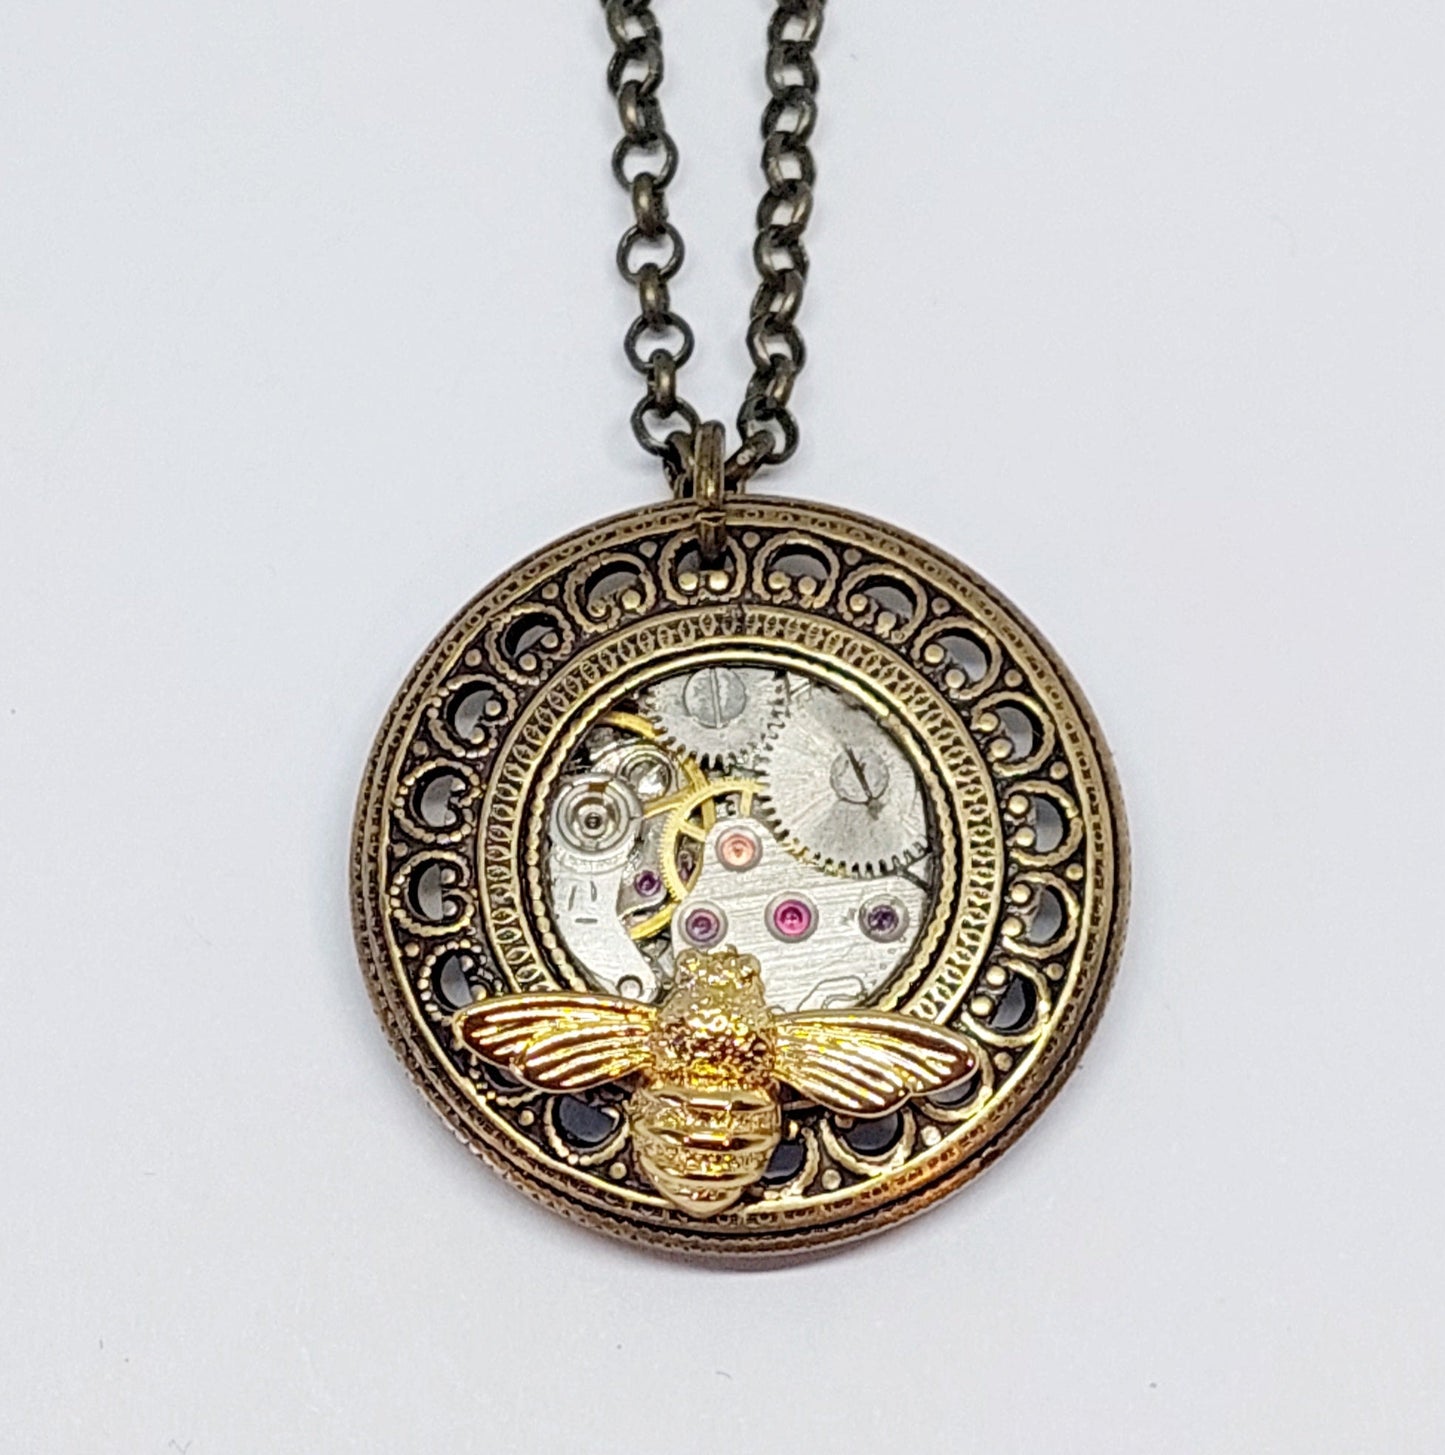 Timepiece Filigree Porthole Pendant with Bee - Brass or Silver